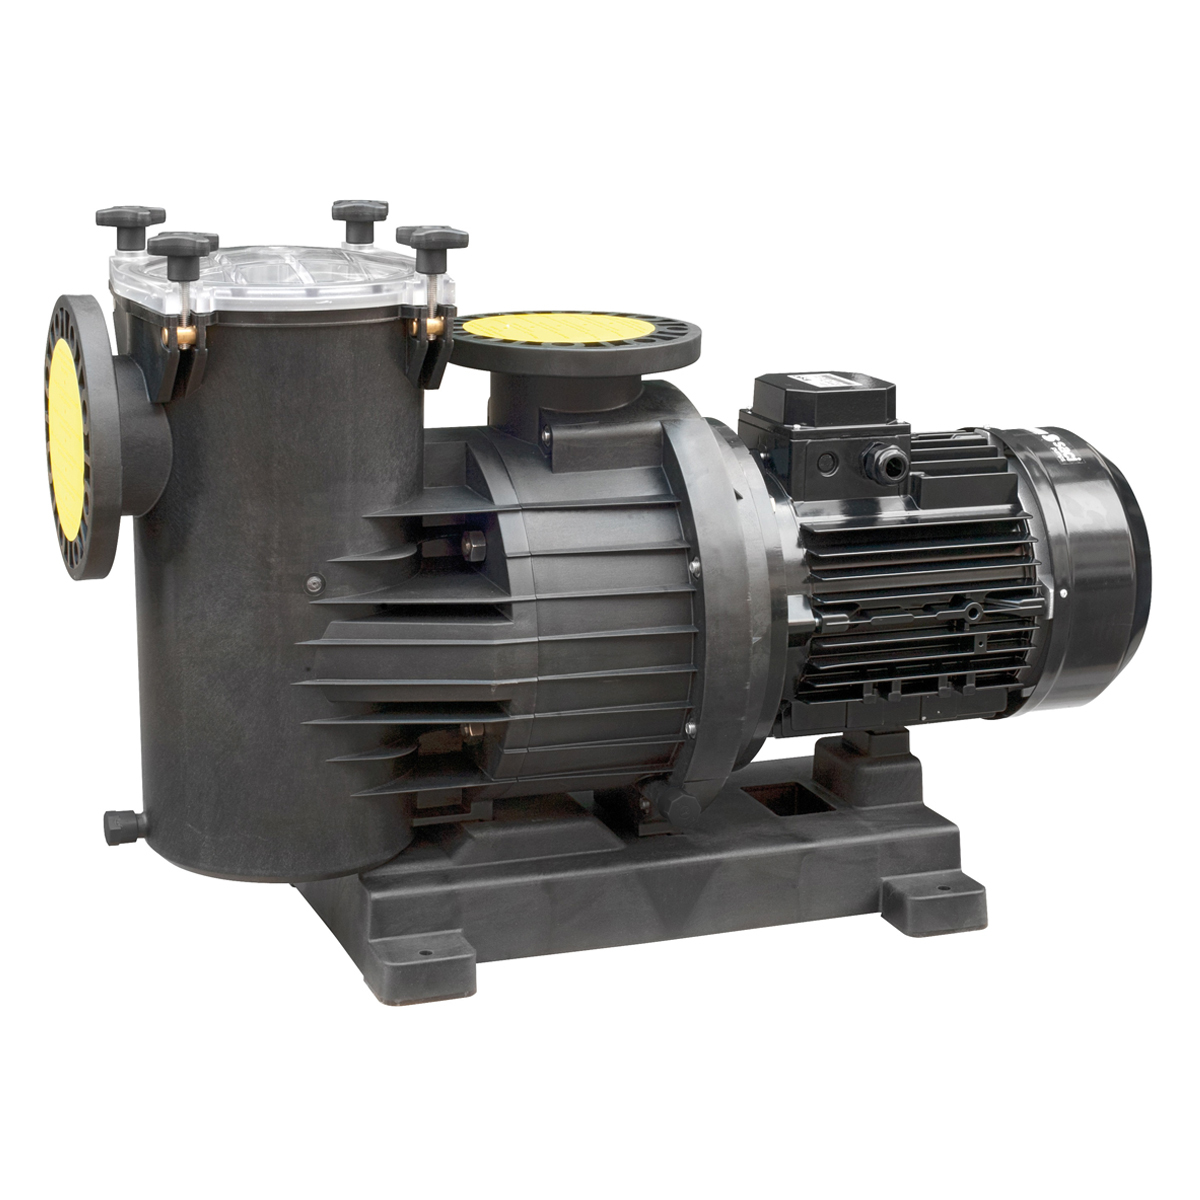 Smart Power Filter Pump 400 230-400V, 1450 rpm 3 kW, 4 HP, 56 m3/h at 10m Smart Power Filter Pump 400 230-400V, 1450 rpm 3 kW, 4 HP, 56 m3/h at 10m